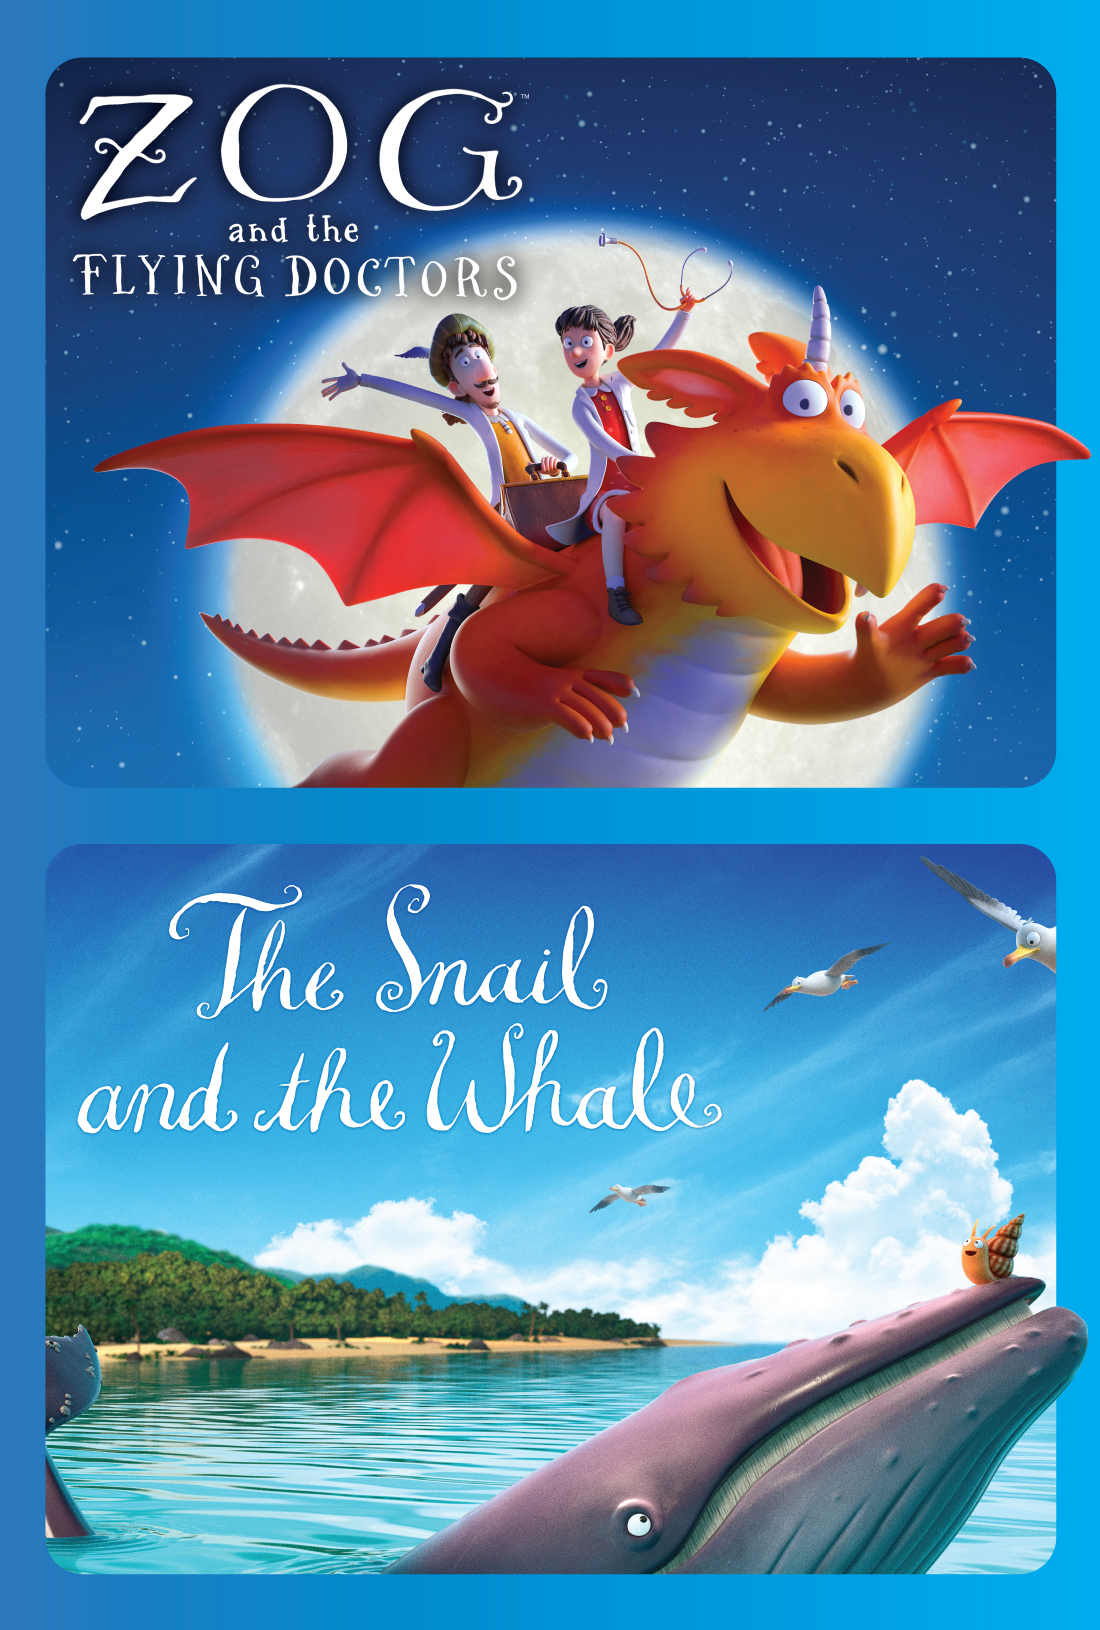 Zog & The Flying Doctors and Snail & the Whale Poster